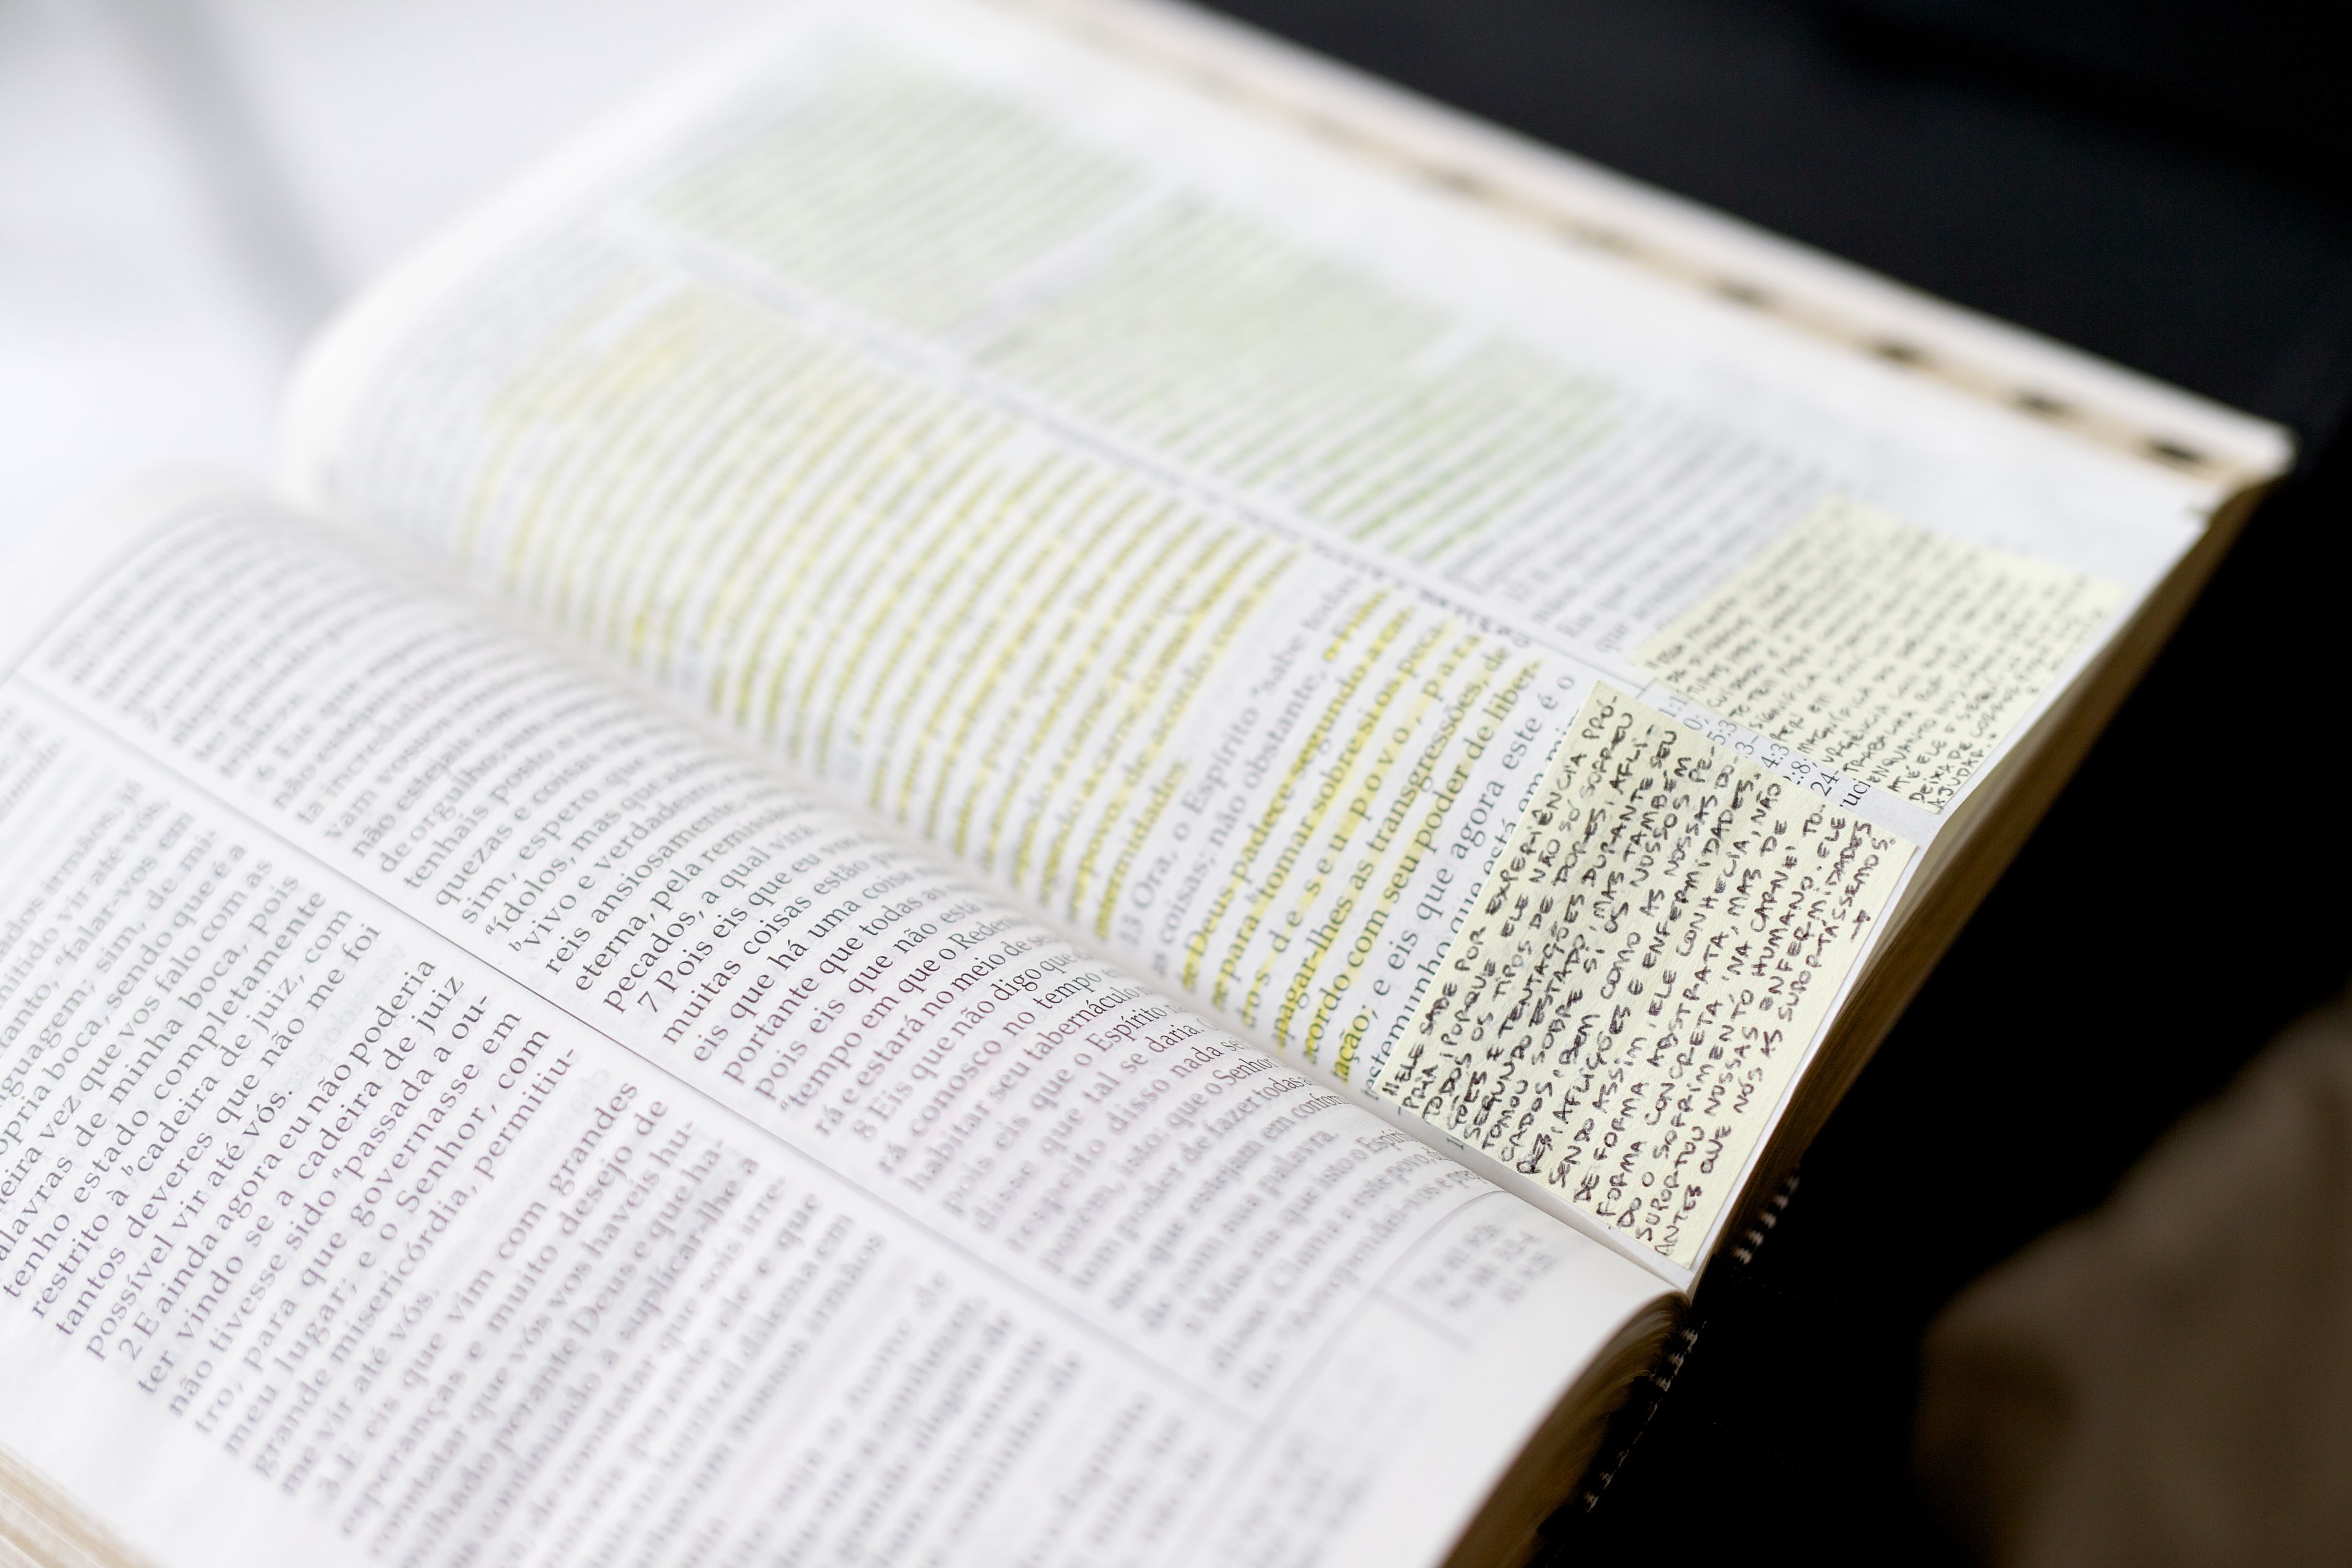 Opened Portuguese scriptures with yellow highlights and sticky notes.